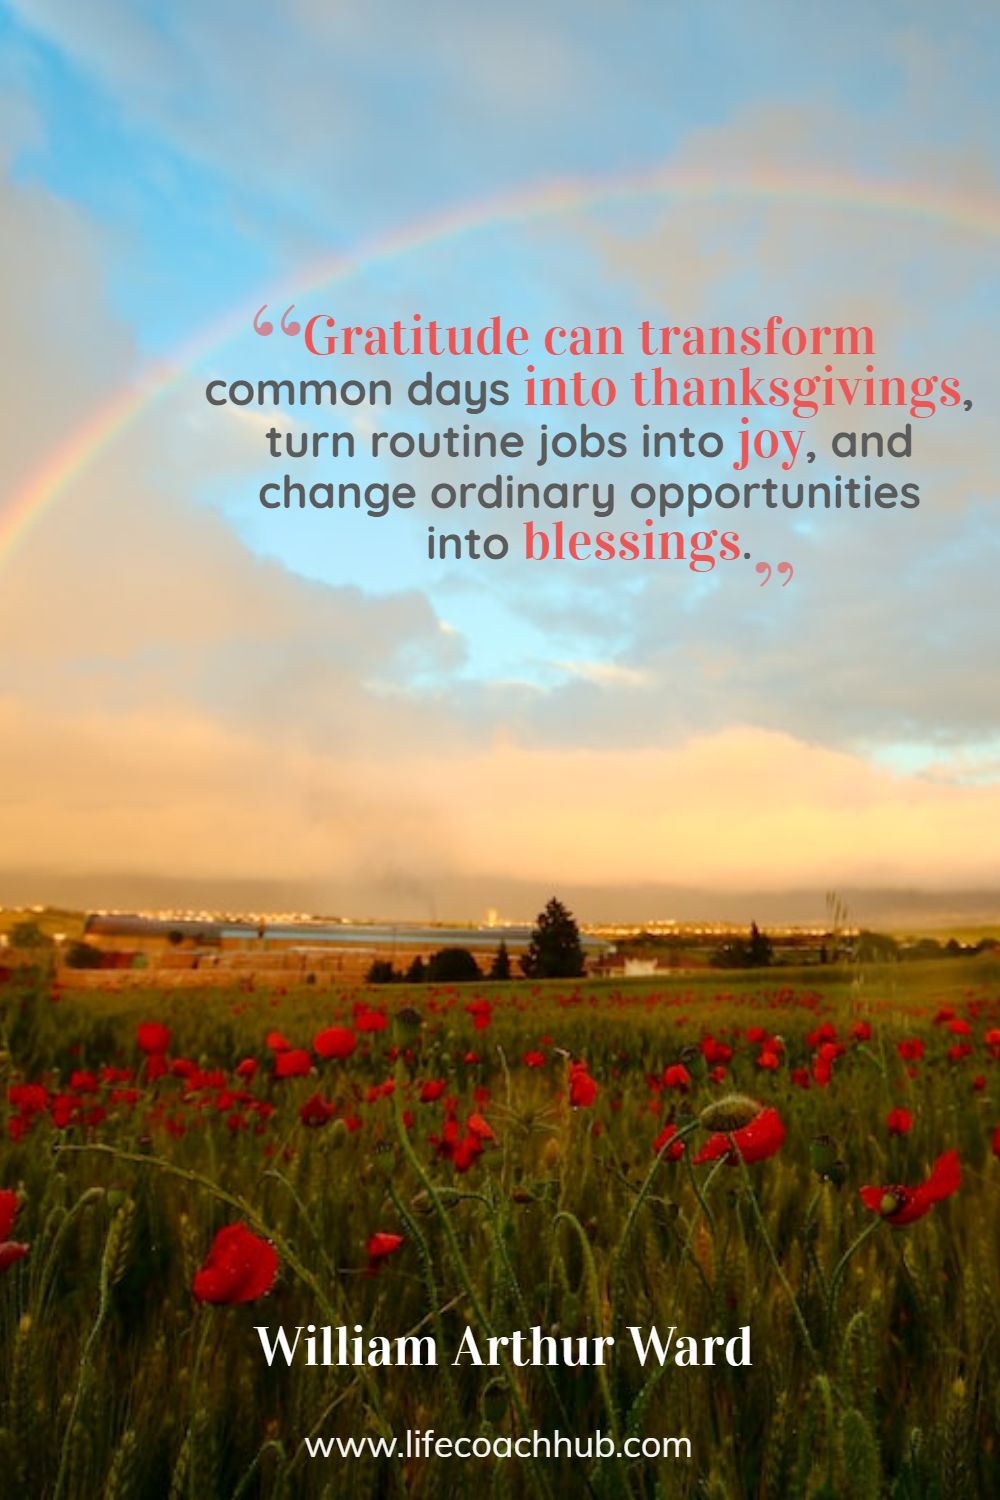 Gratitude can transform common days into thanksgivings, turn routine jobs into joy, and change ordinary opportunities into blessings. William Arthur Ward Coaching Quote